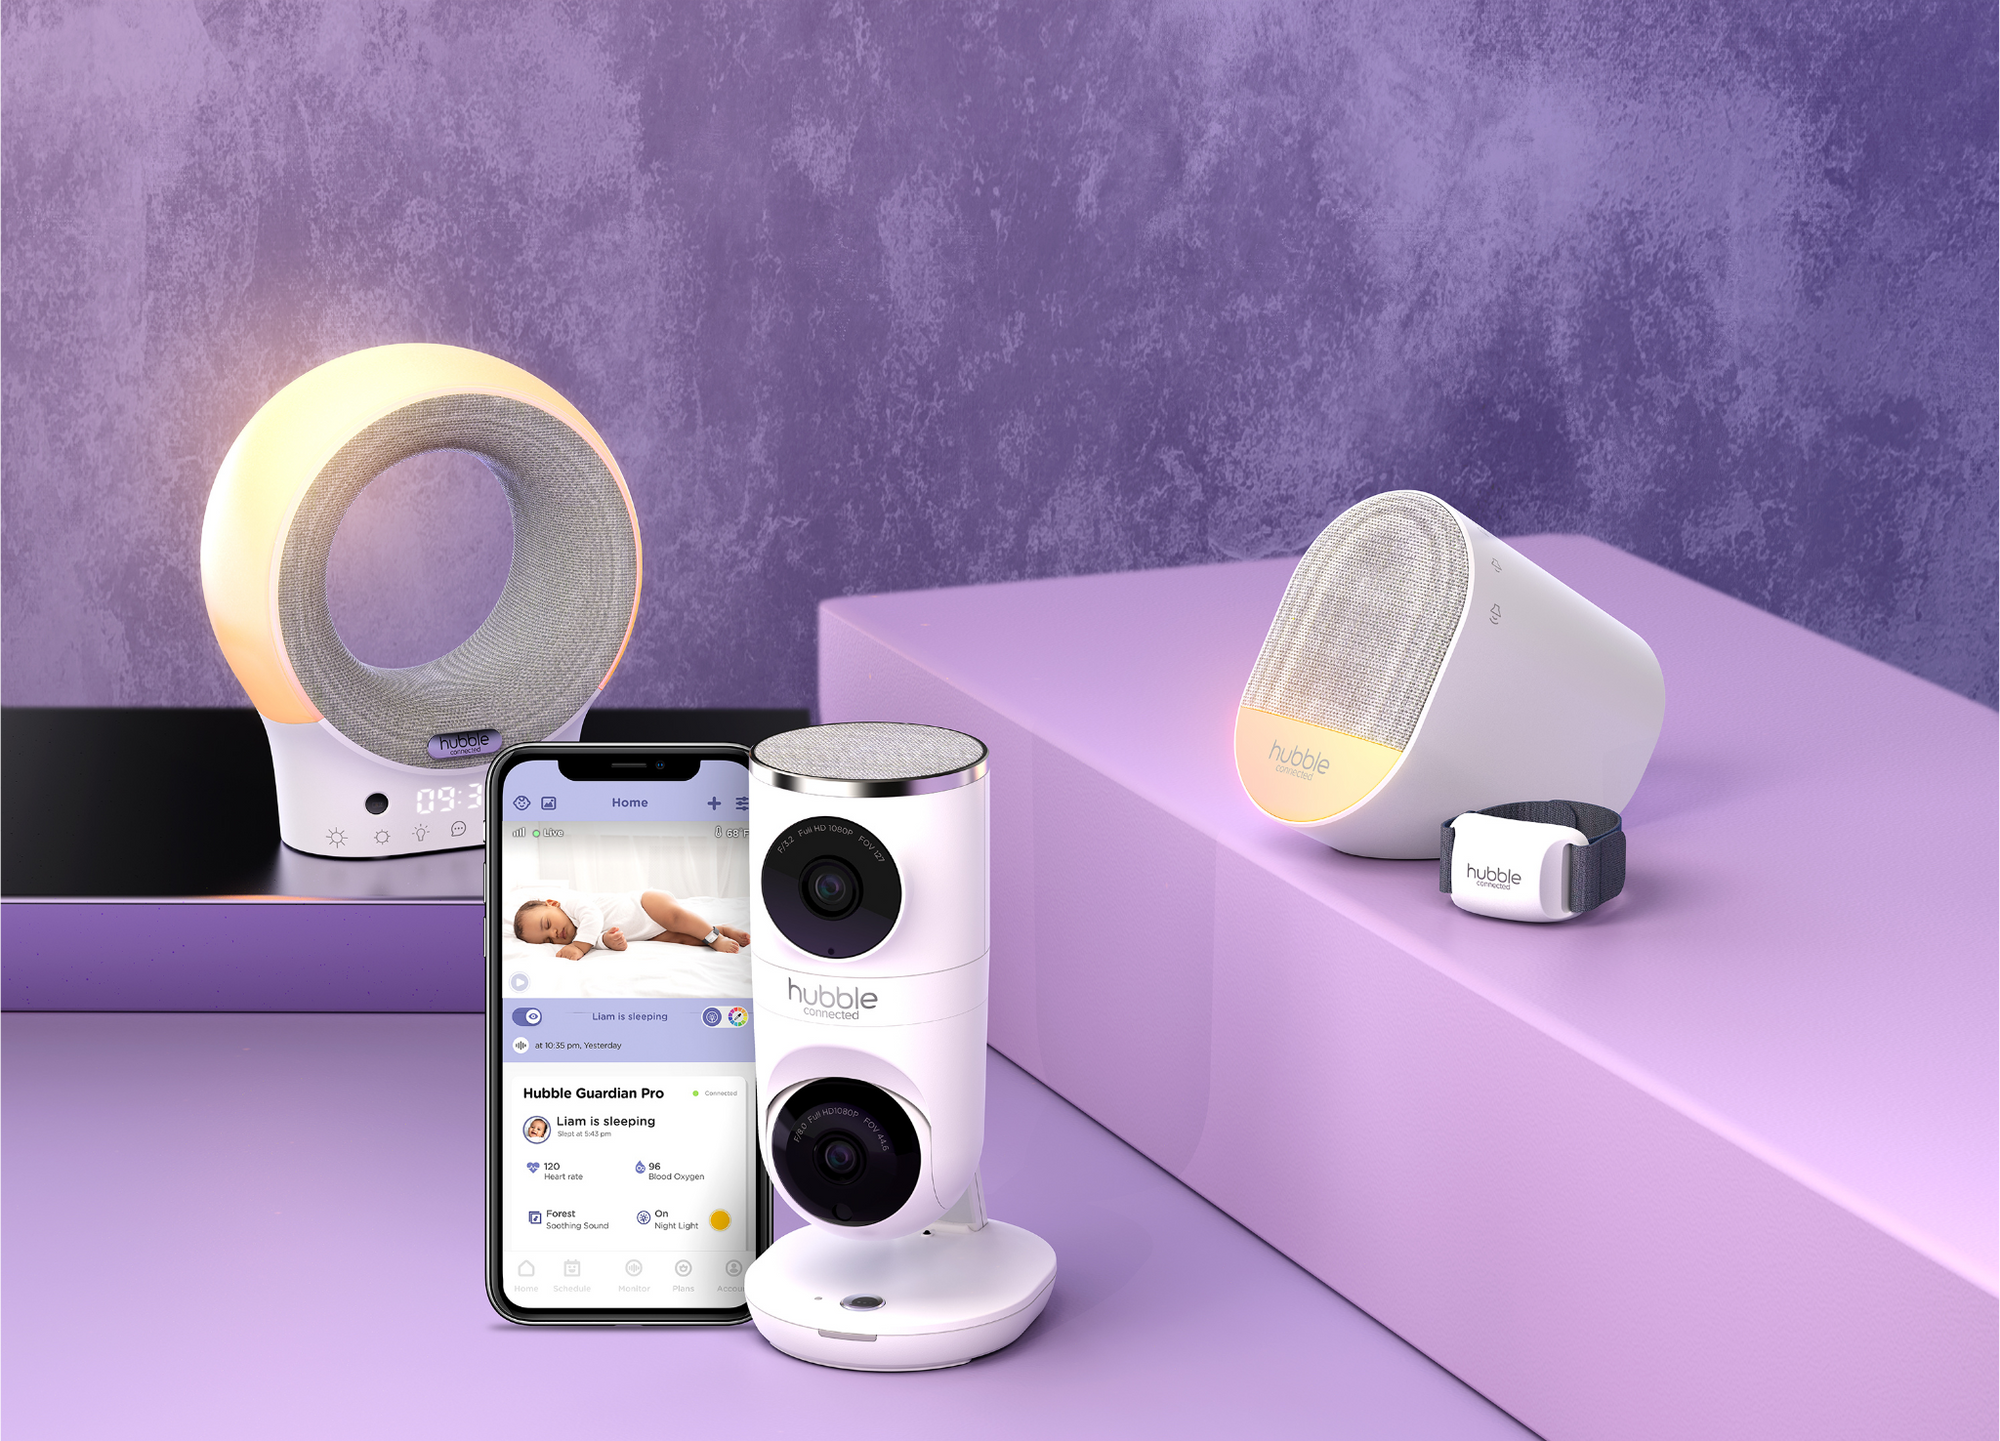 Three Hubble Connected Next Generation “Smart Nursery” Products  Win 2023 National Parenting Product Awards